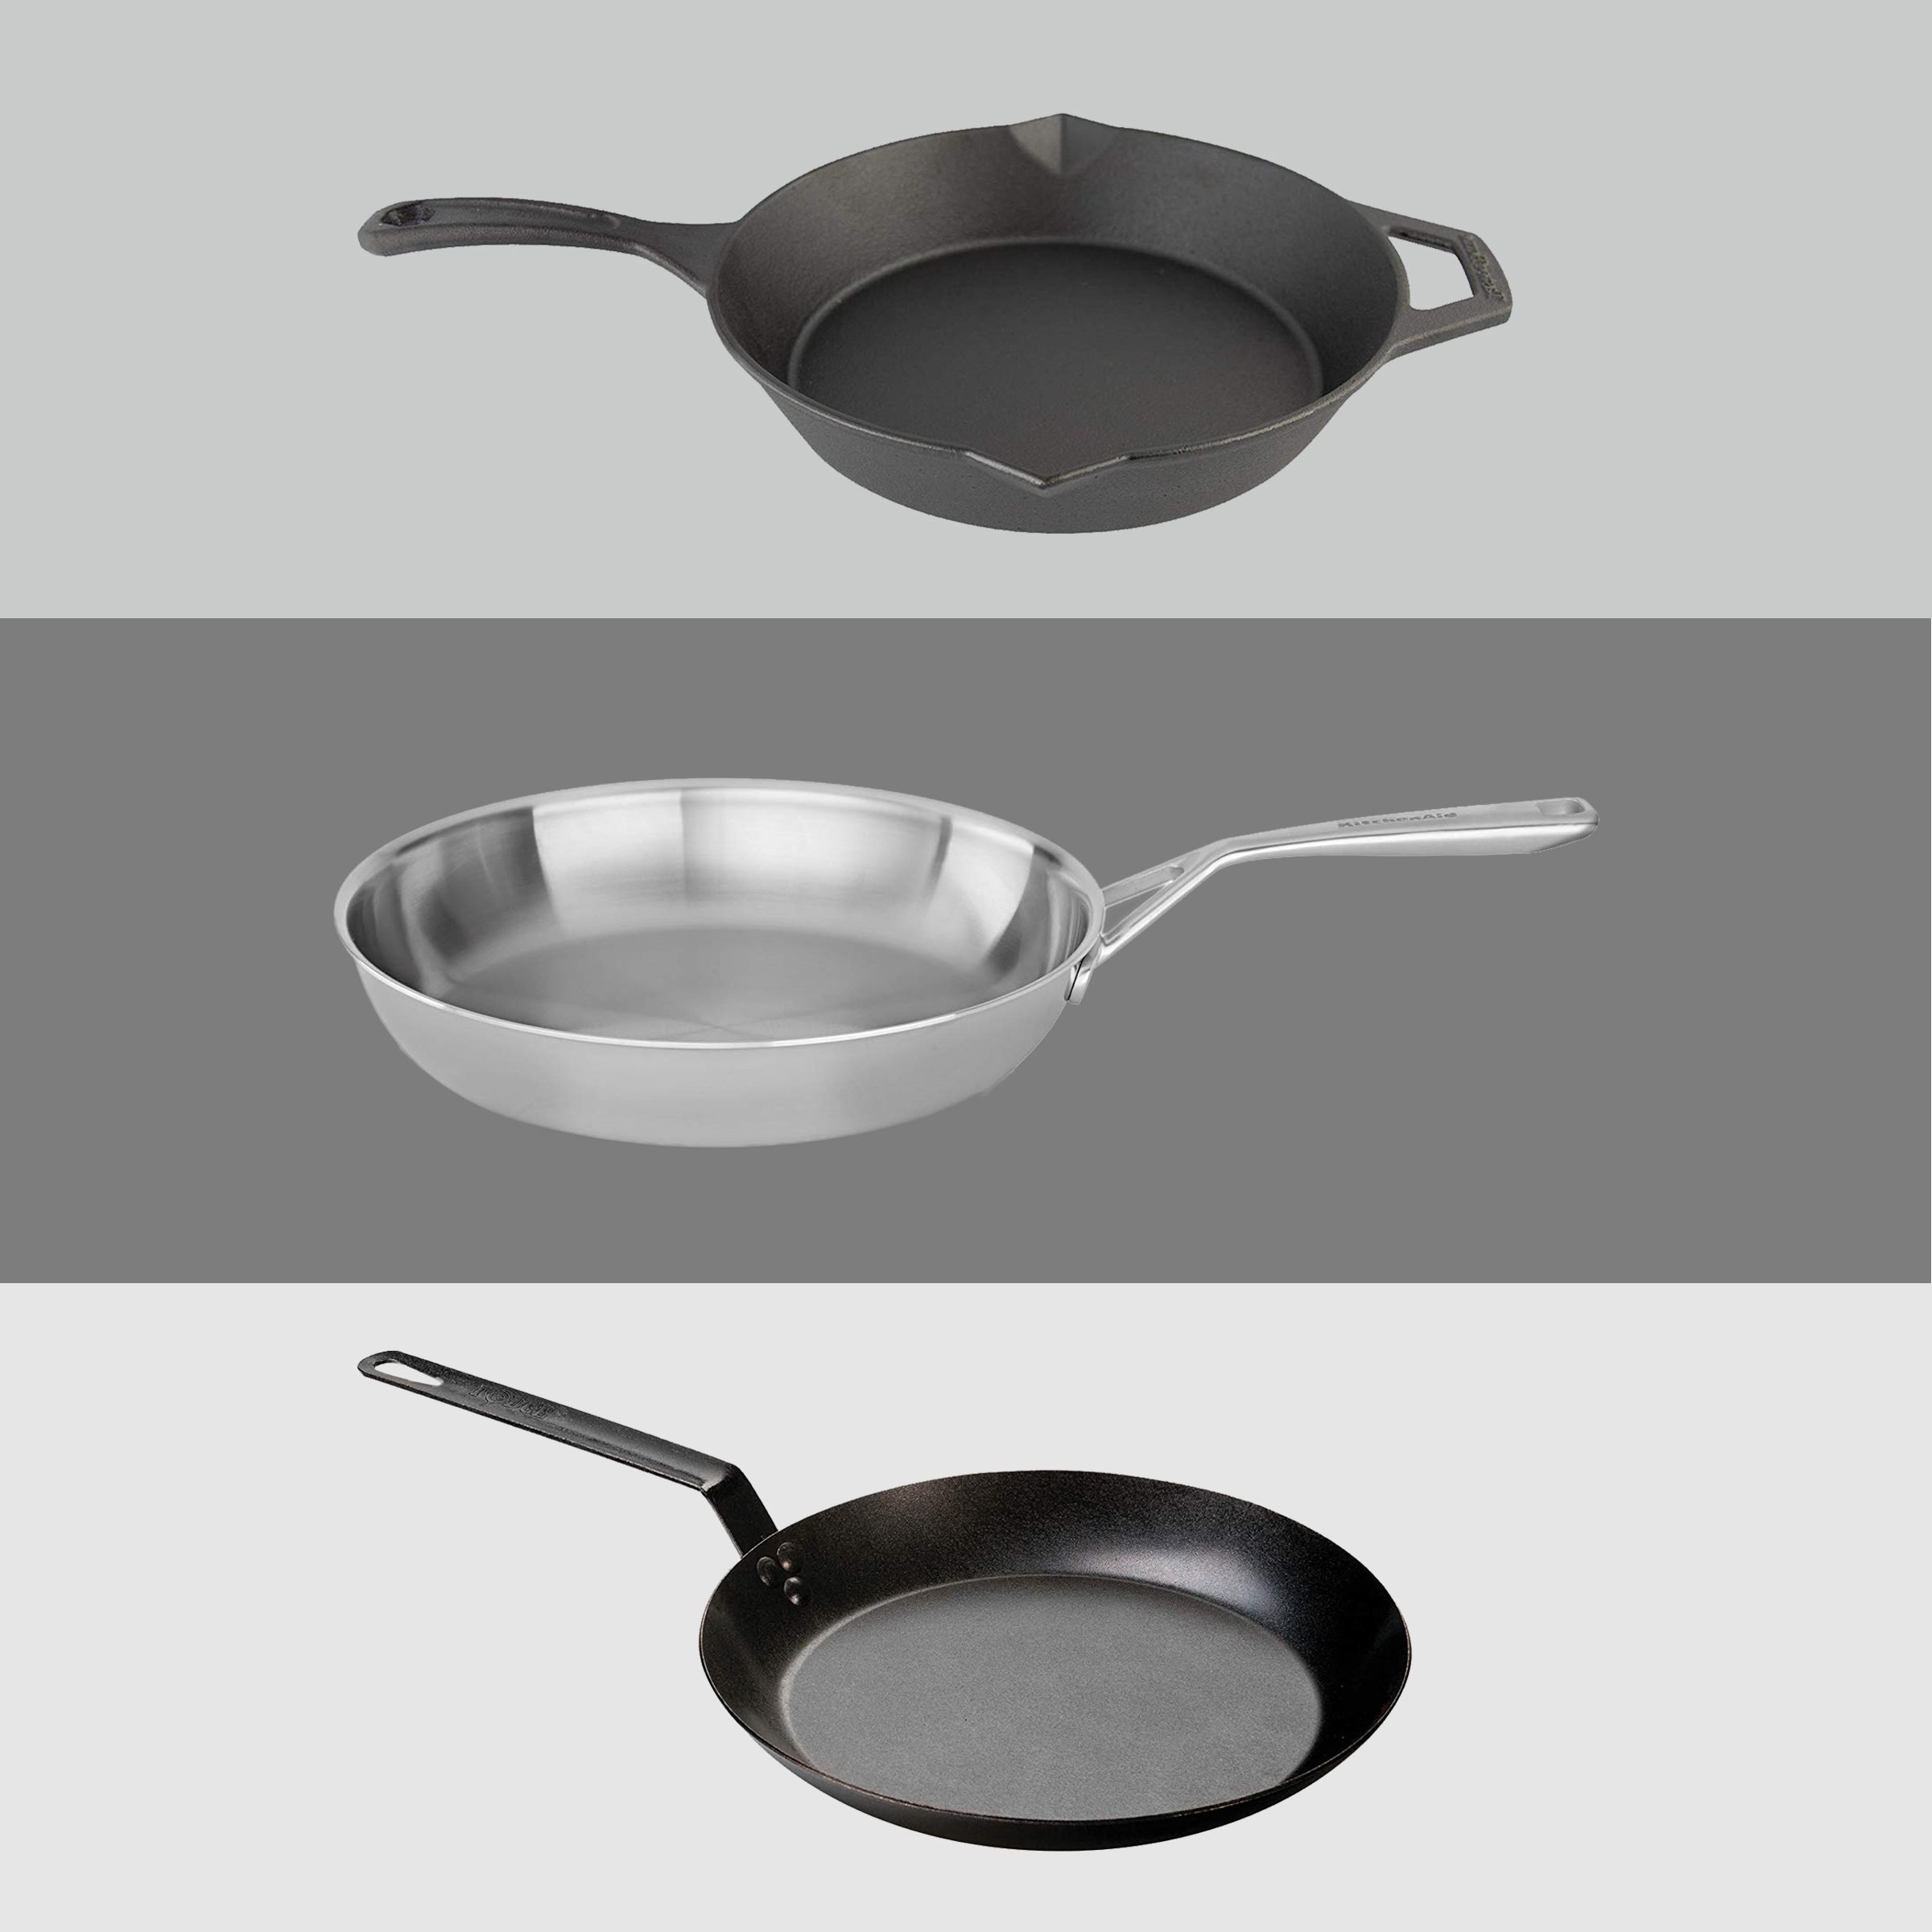 Choosing the Best Cast Iron Cookware for Your Home in 2020